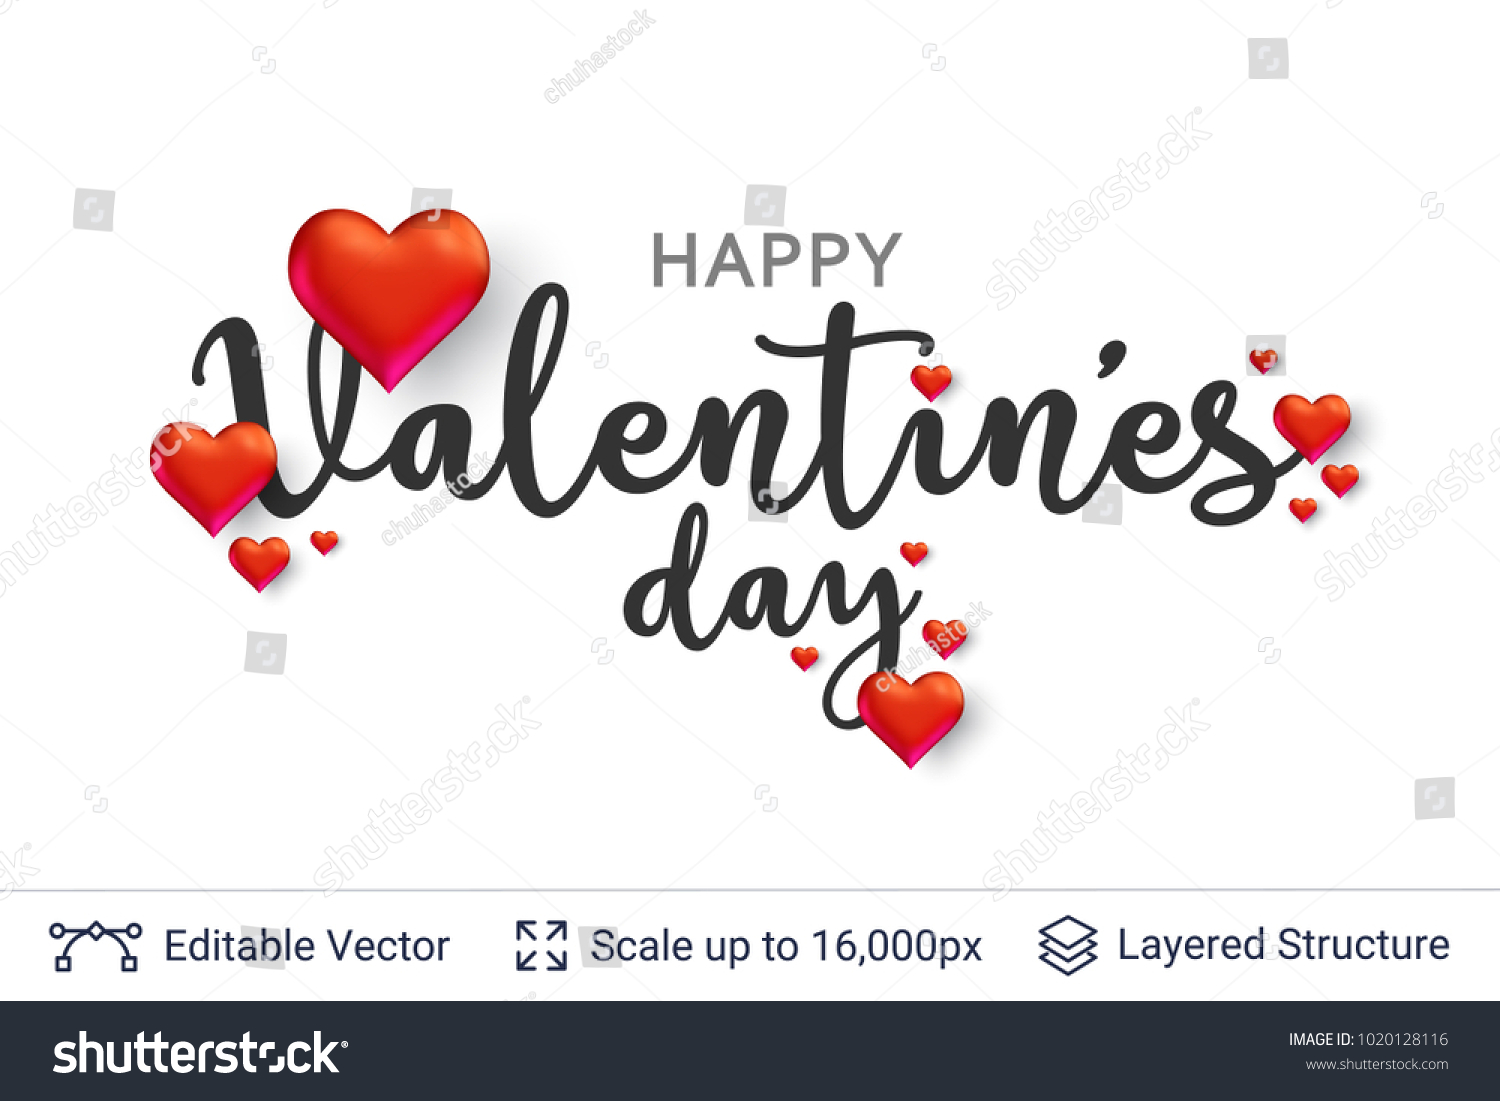 Happy Valentines day text and 3D hearts on white. Easy to edit vector background. Holiday greeting card design. #1020128116